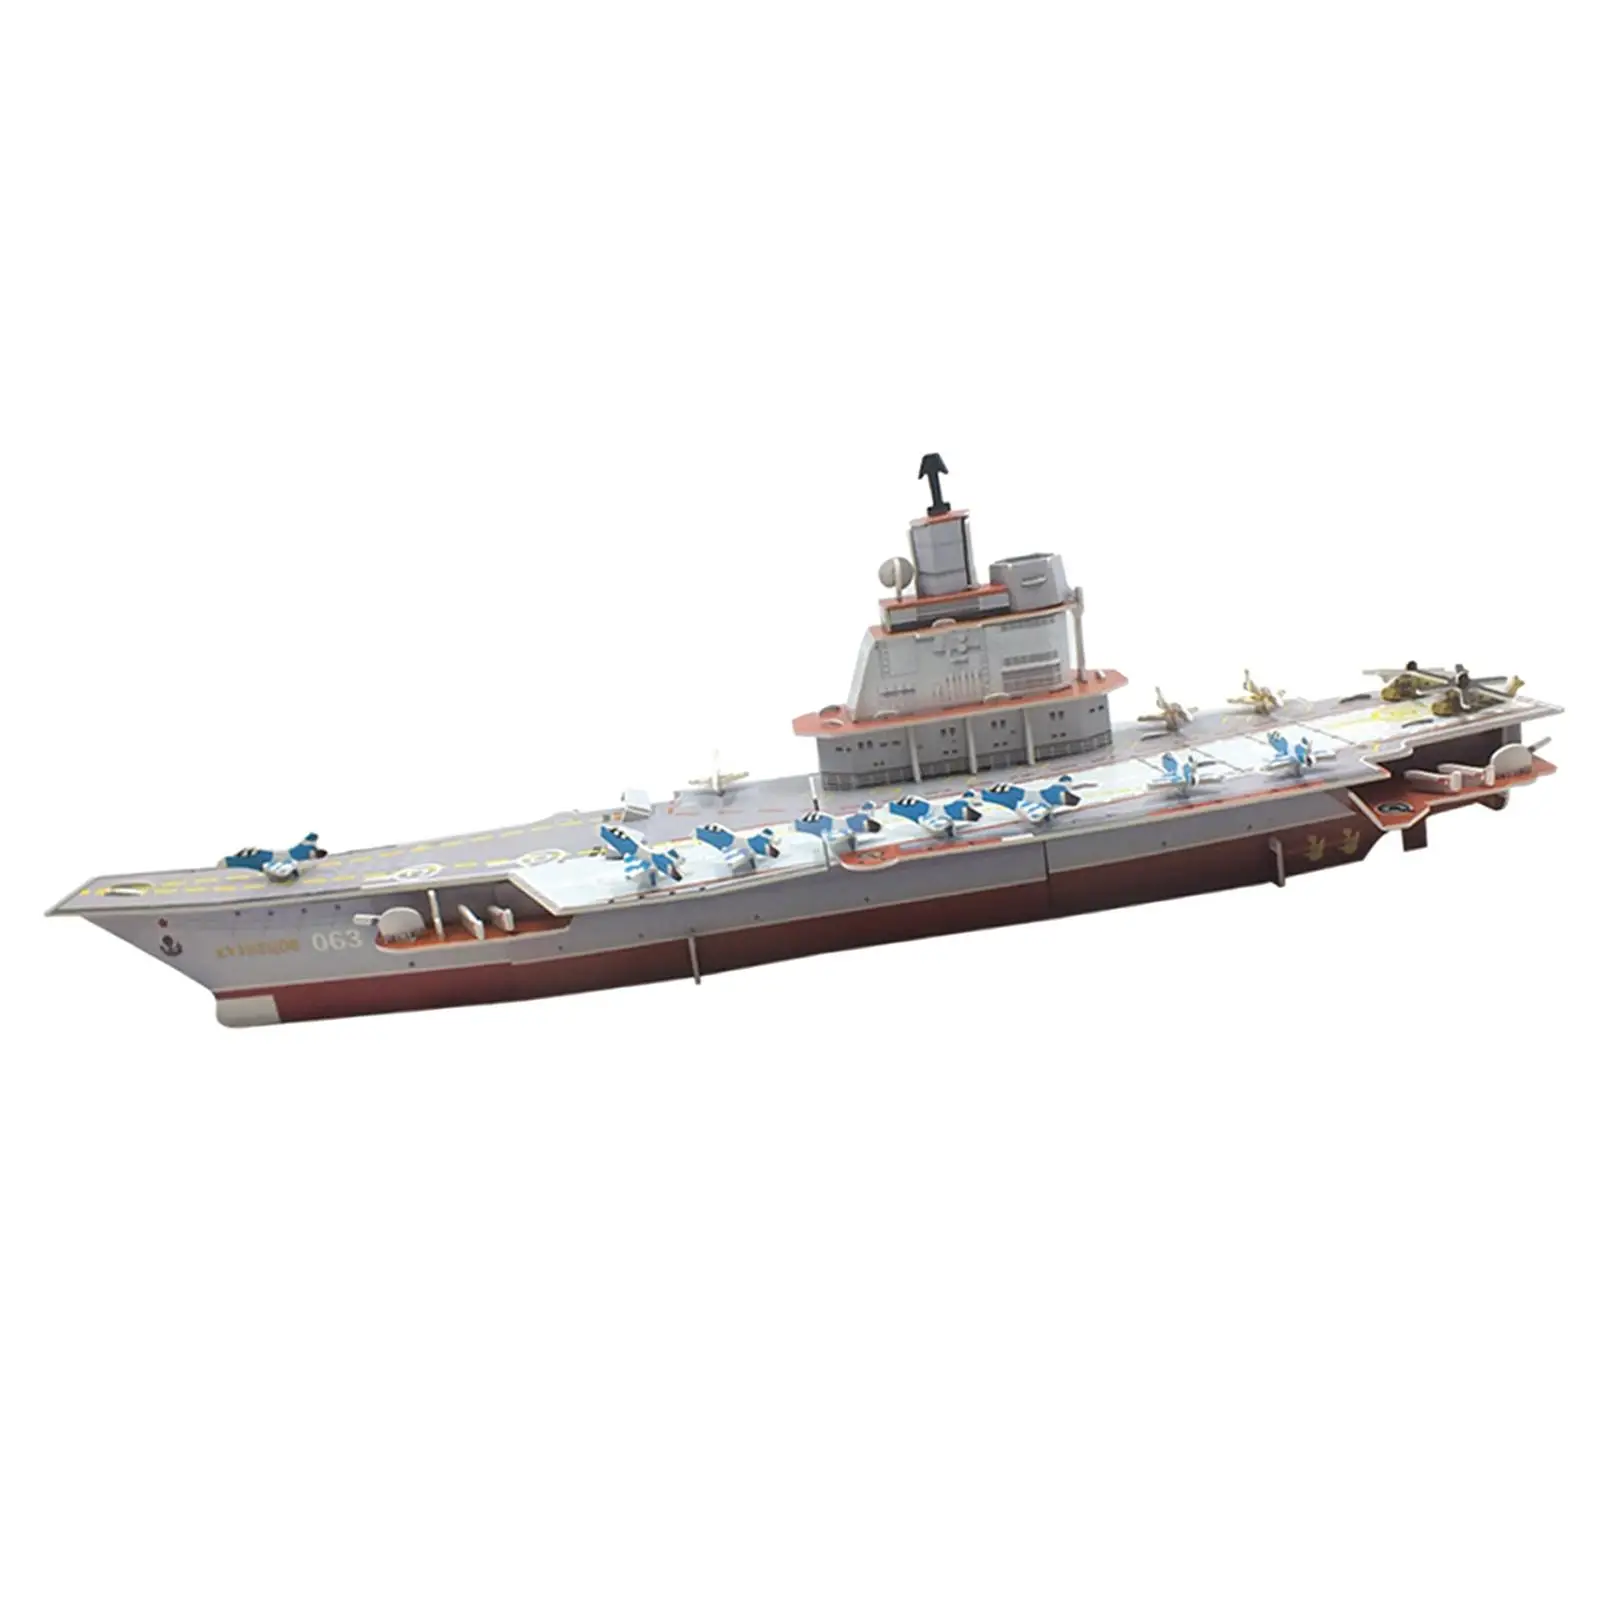 Miniature Ship Boat Model Kits DIY Puzzle Boat Model Ship Model Kits for Study Collections Ornaments Decoration